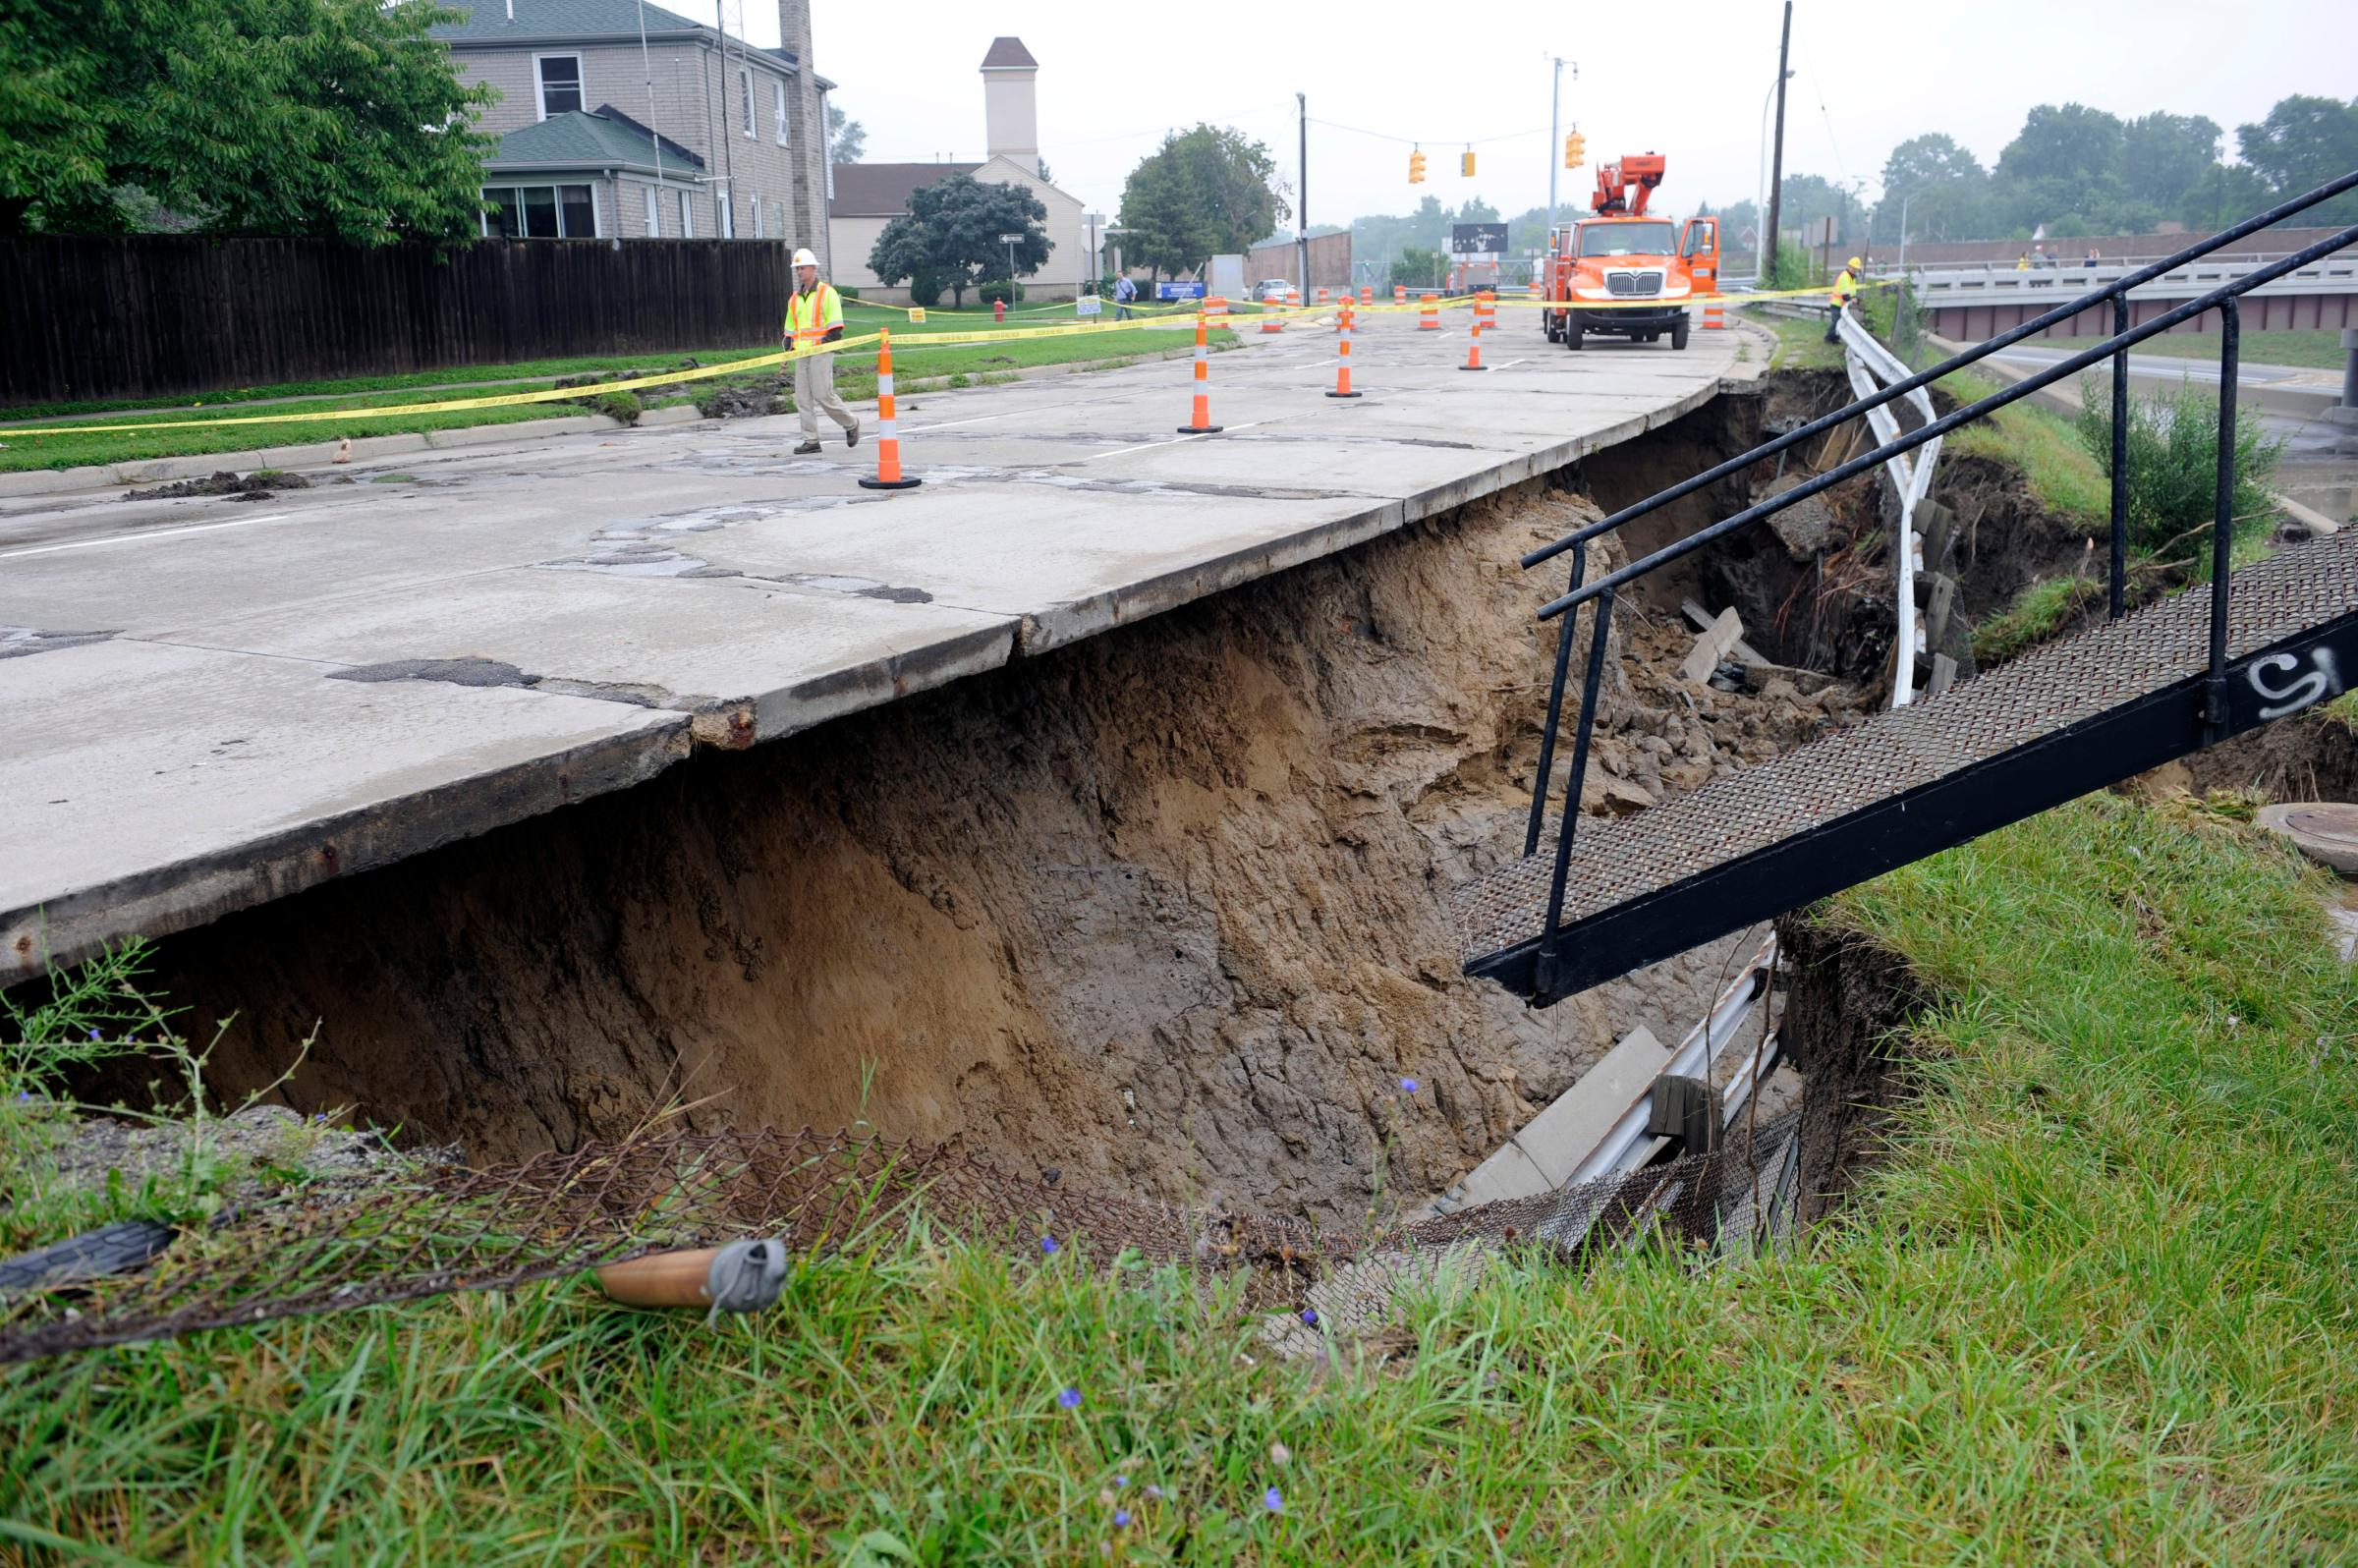 The west service drive of I-75 is washed out under the roadway in Madison Heights, Mich. on Aug. 12, 2014. Fearing more motorists could become stranded a day after a storm dumped more than 6 inches of rain in some places in and around Detroit, the state warned commuters against driving in affected areas Tuesday morning.